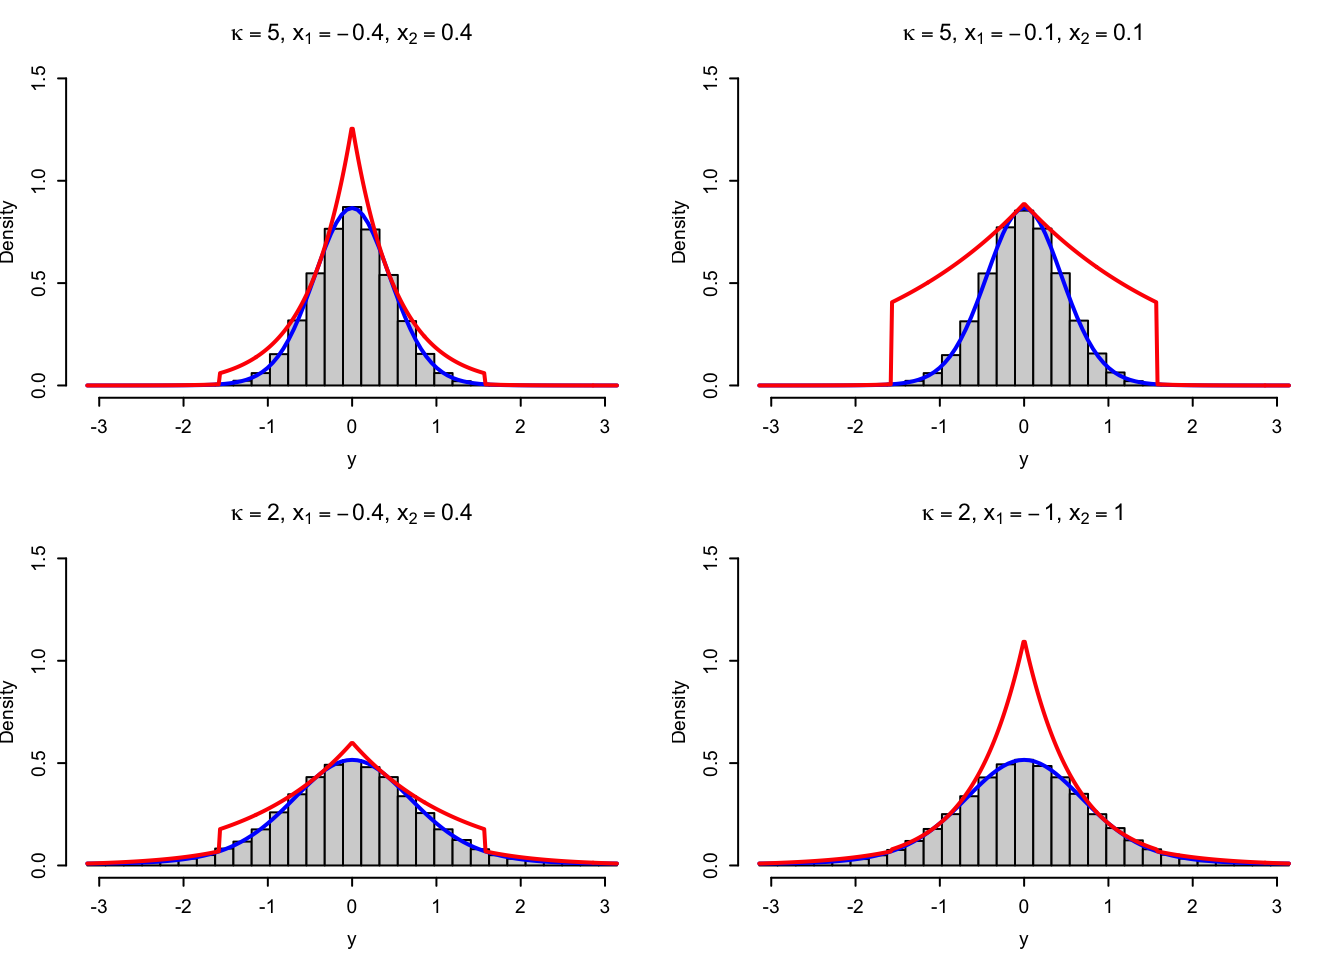 Histograms of simulated variables from von Mises distributions using the rejection sampler with the adaptive envelope based on a combination of log-concavity and log-convexity. The true density (blue) and the envelope (red) are added to the plots.